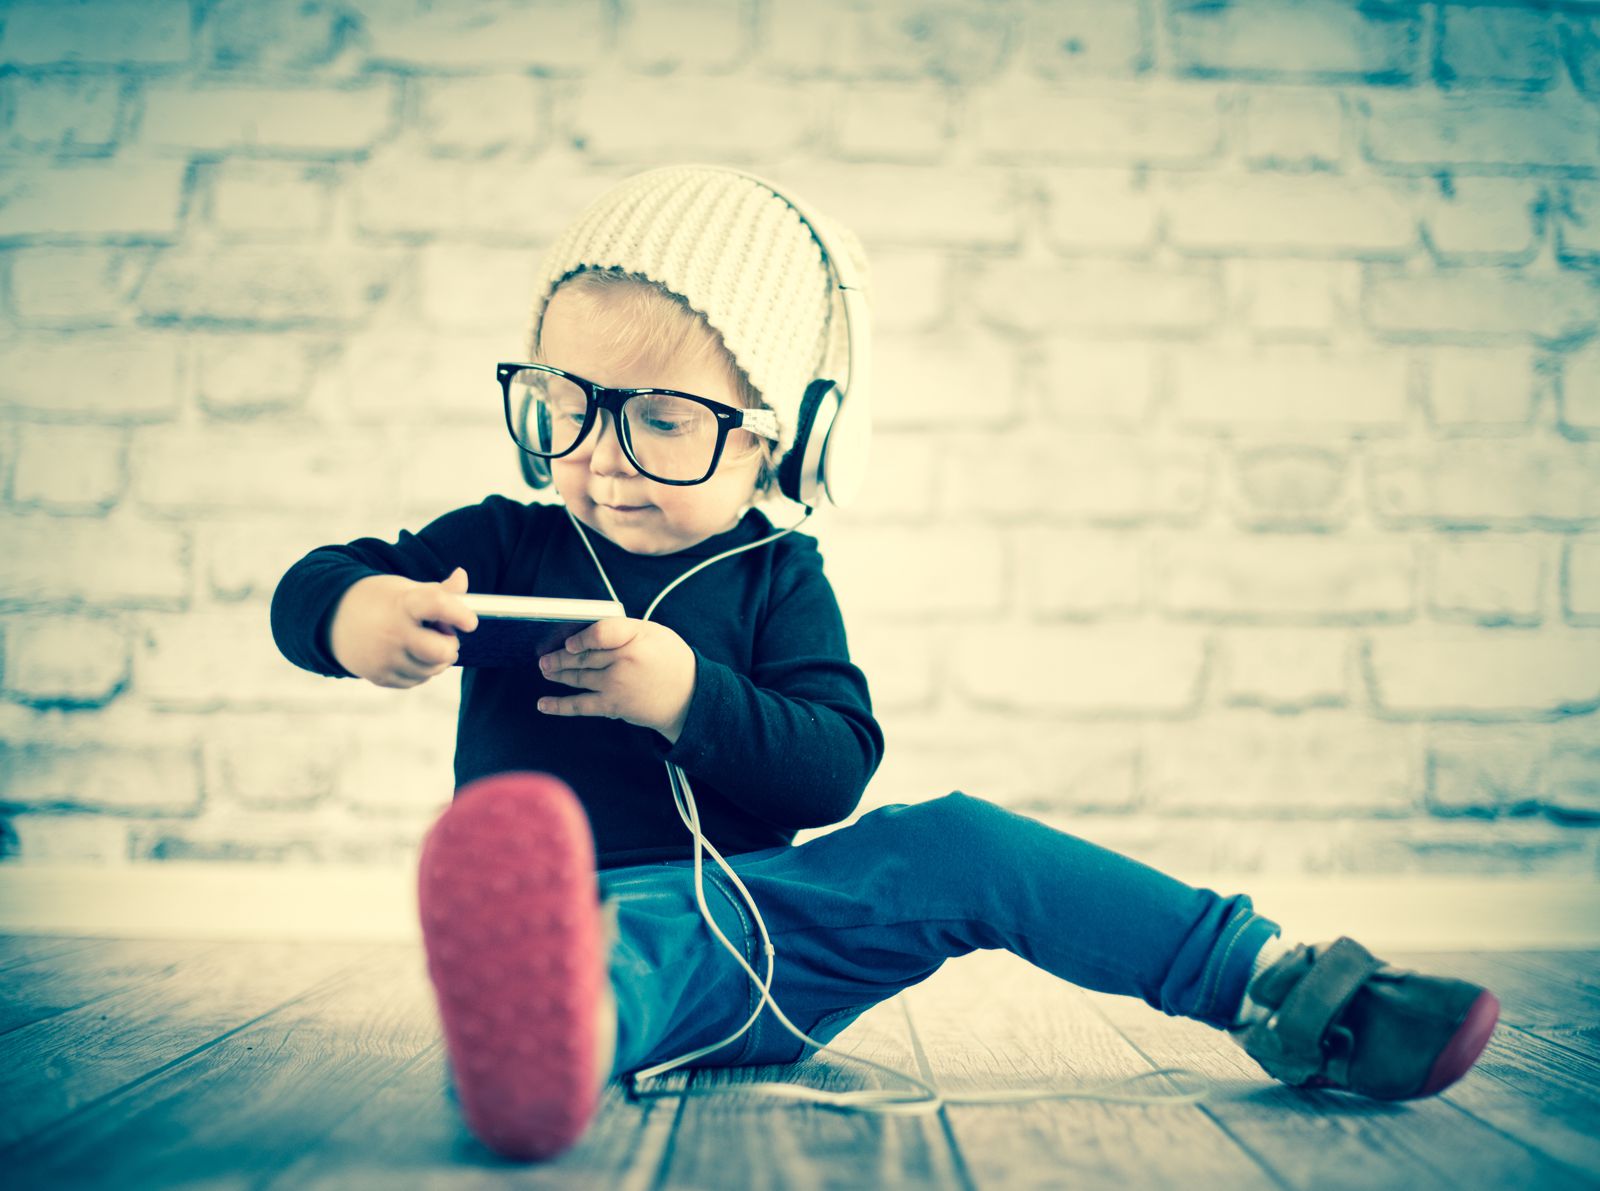 Child with glasses listening to music on an iPod